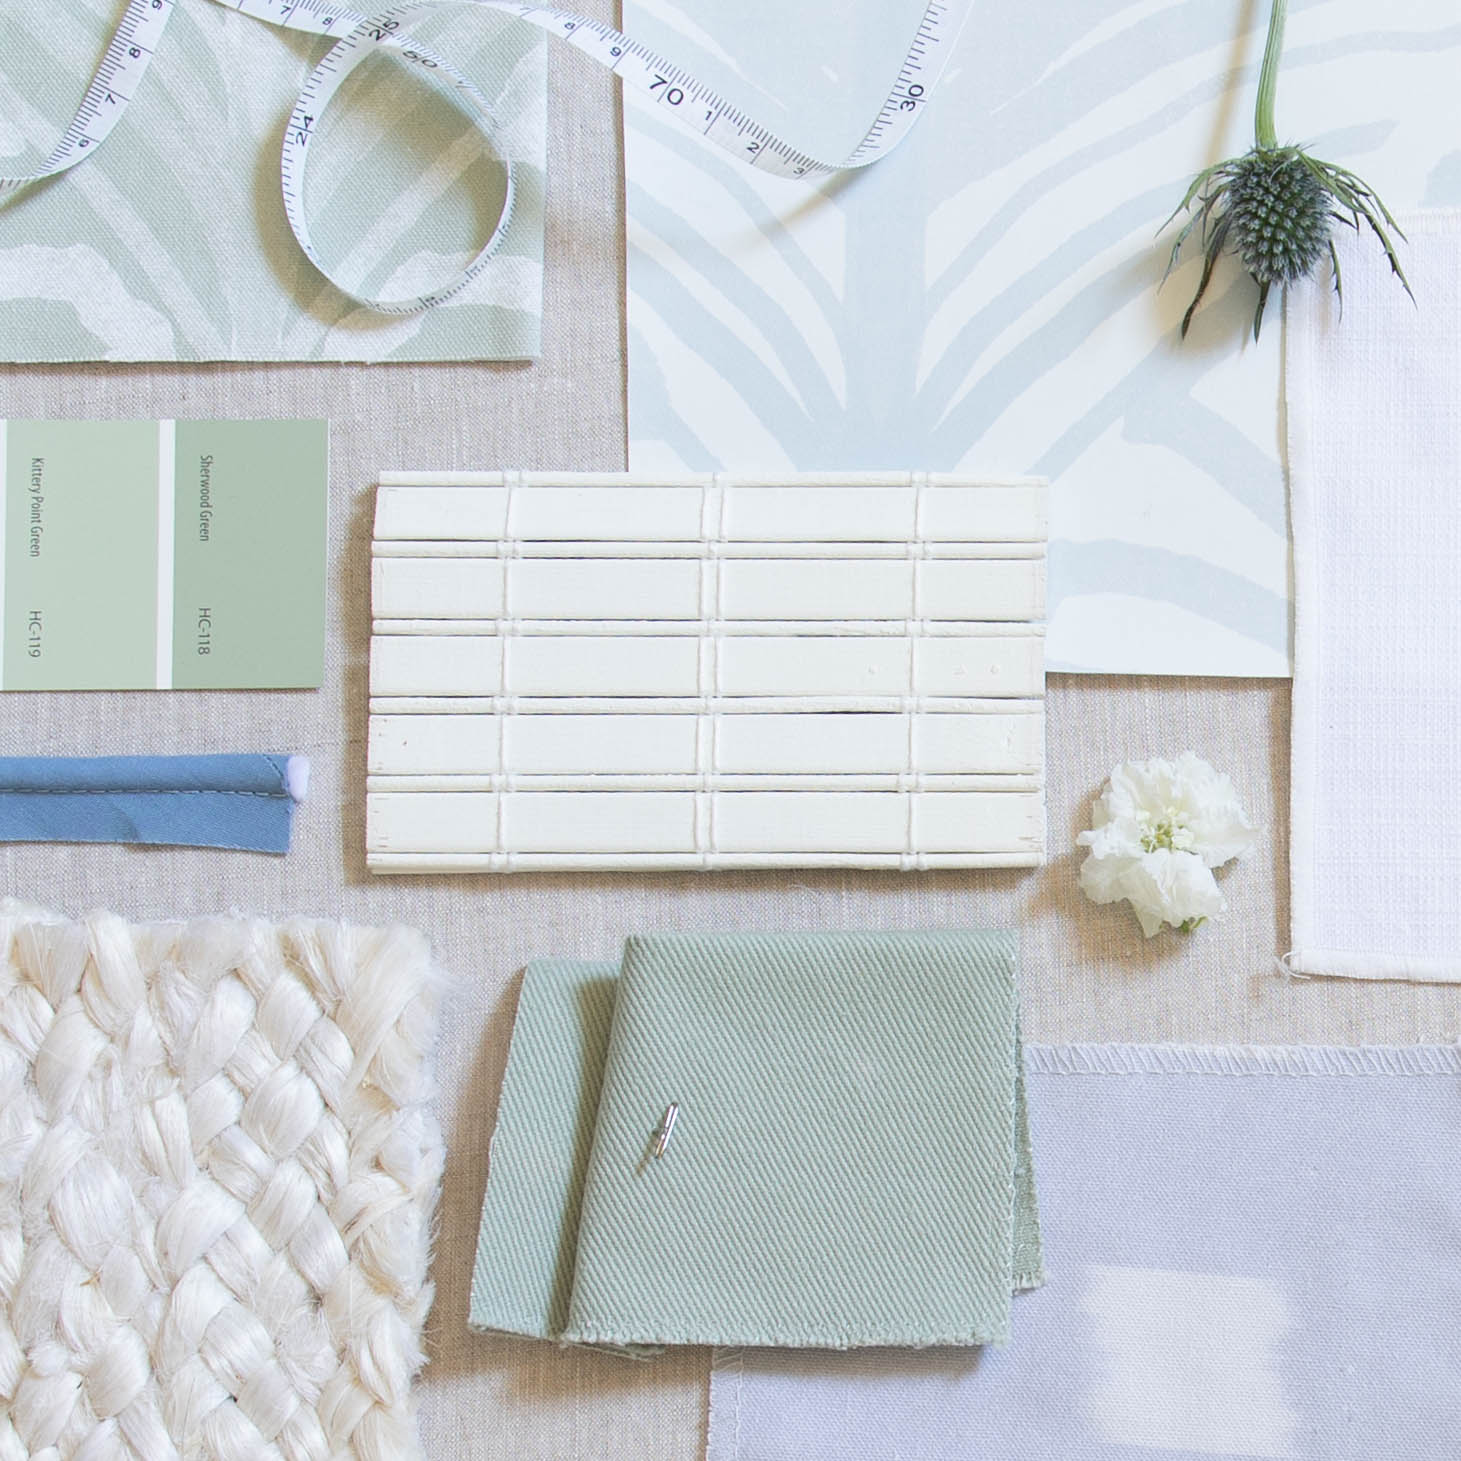 Interior Design Moodboard and Fabric Inspirations with Sage Green Swatch, Sky Blue Pattern Printed Swatch, and Sky Blue Palm Printed Swatch